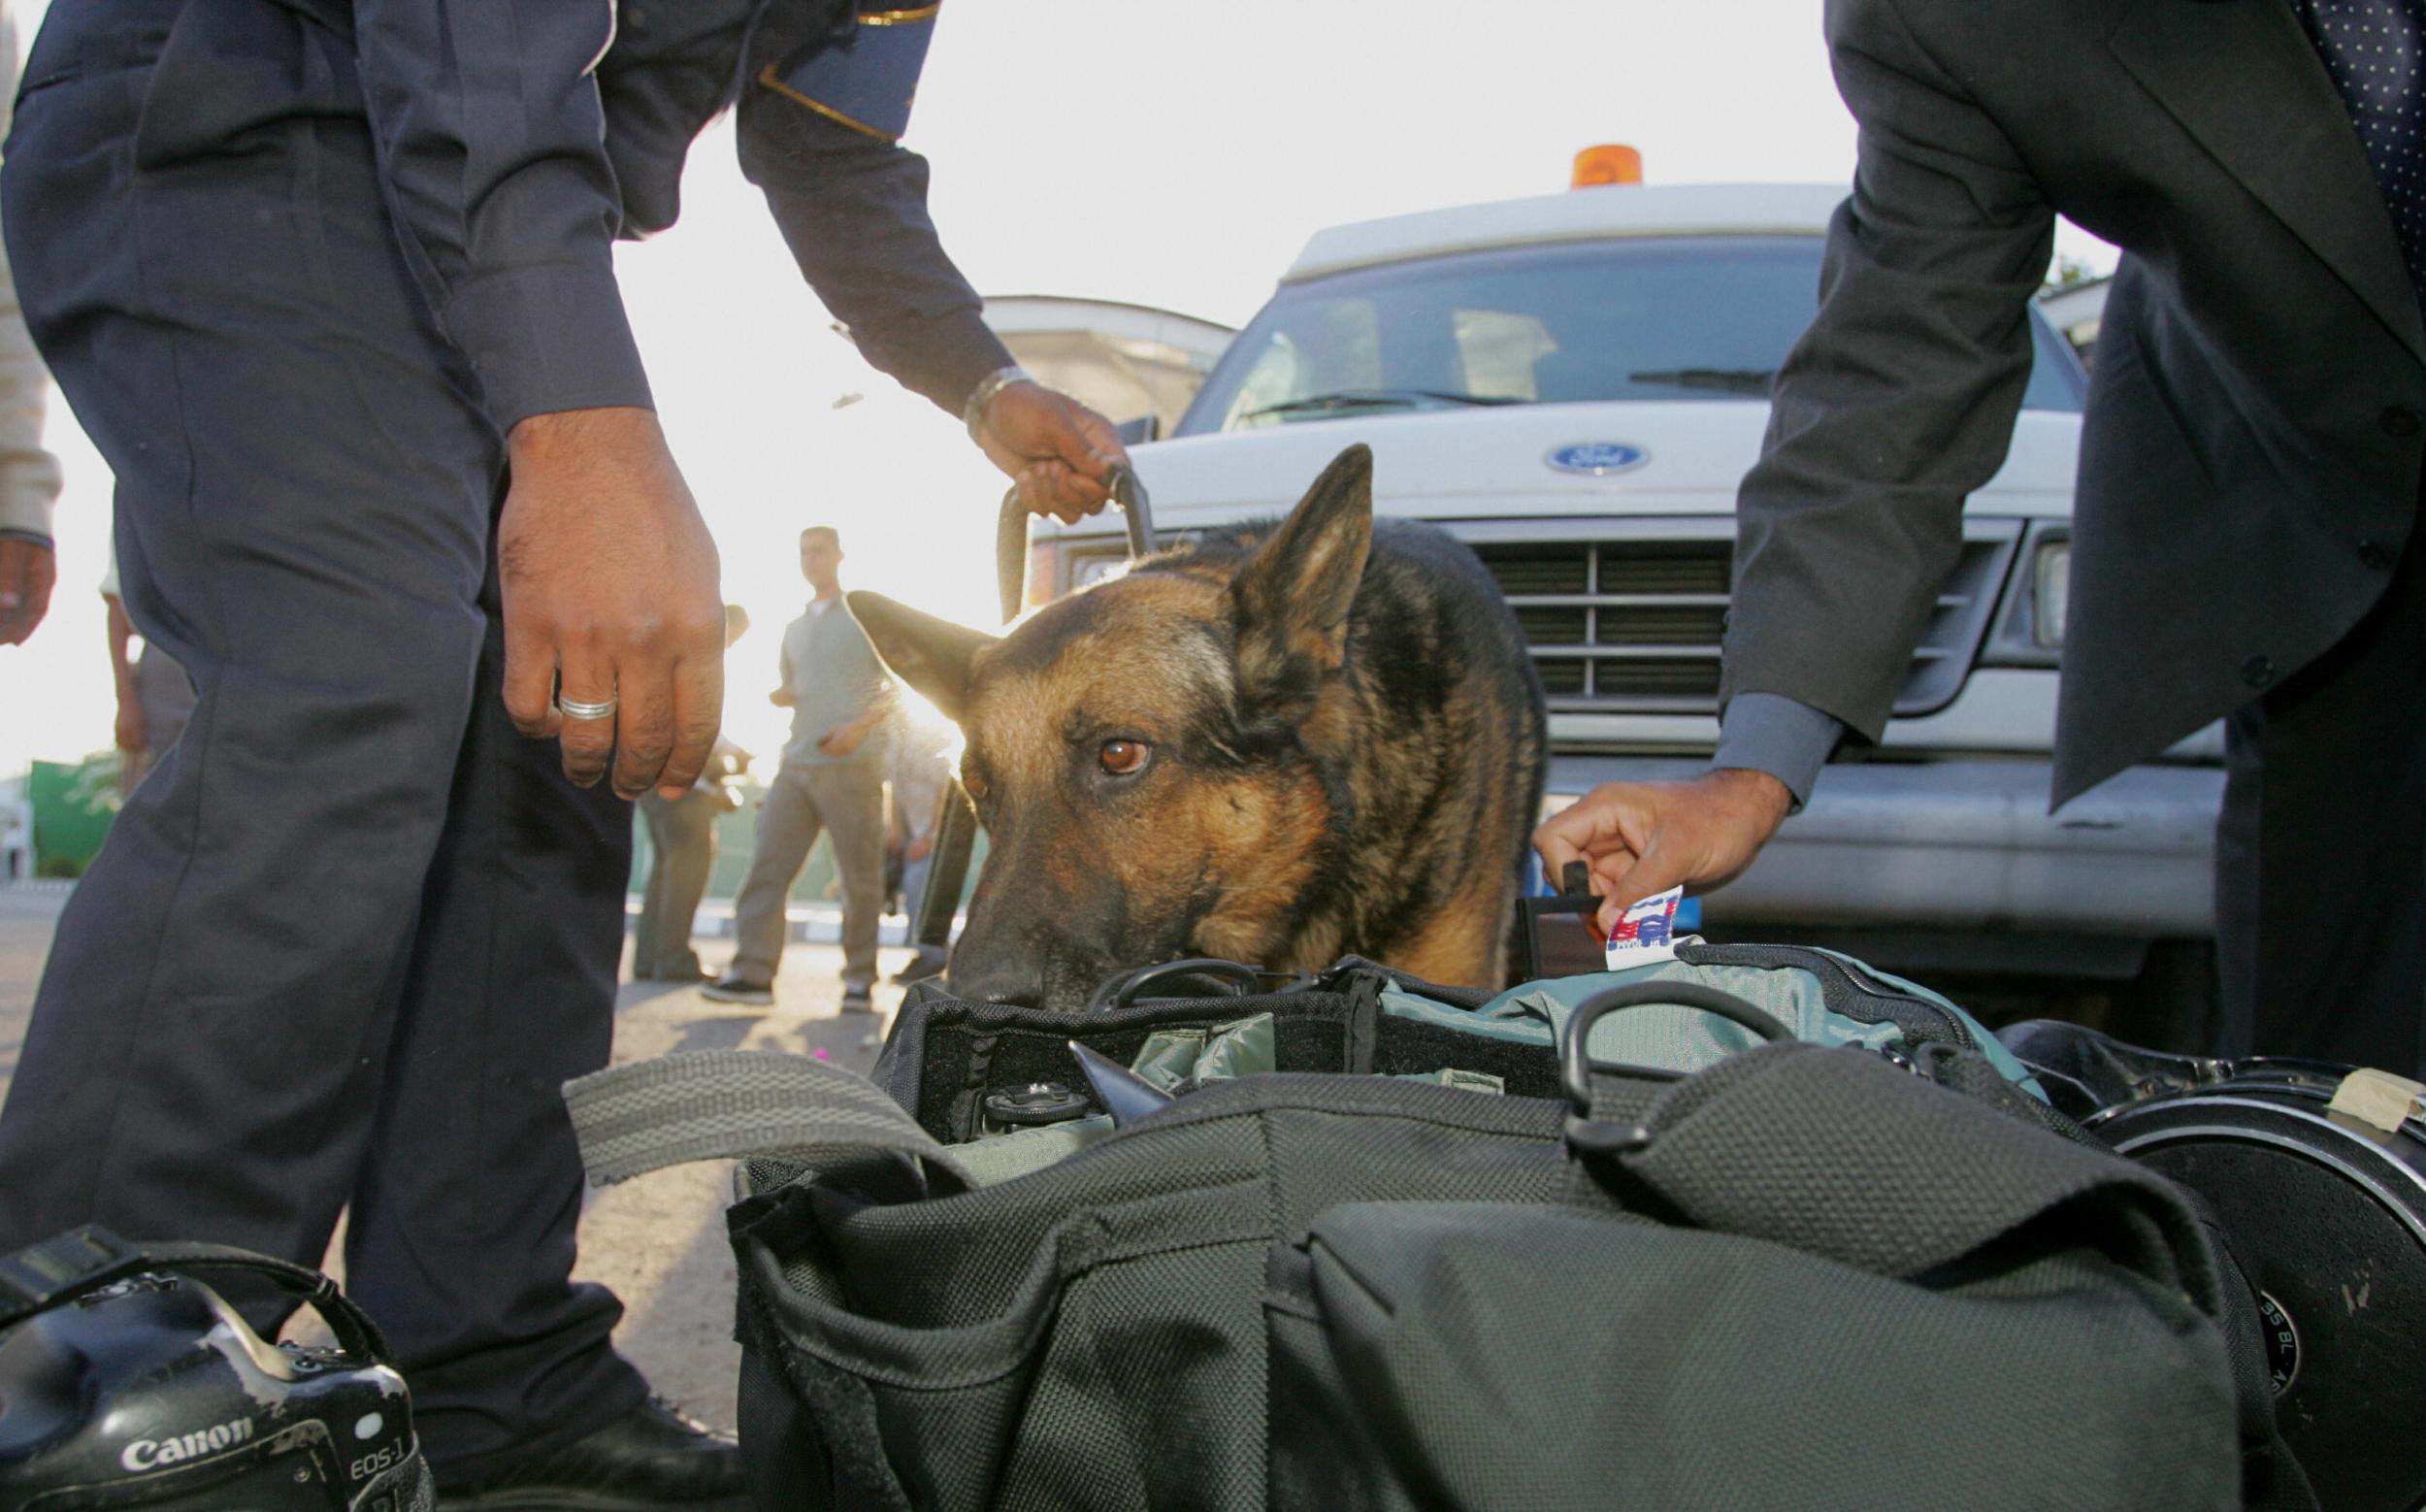 A sniffer dog is used by Egyptian security forces to check luggage